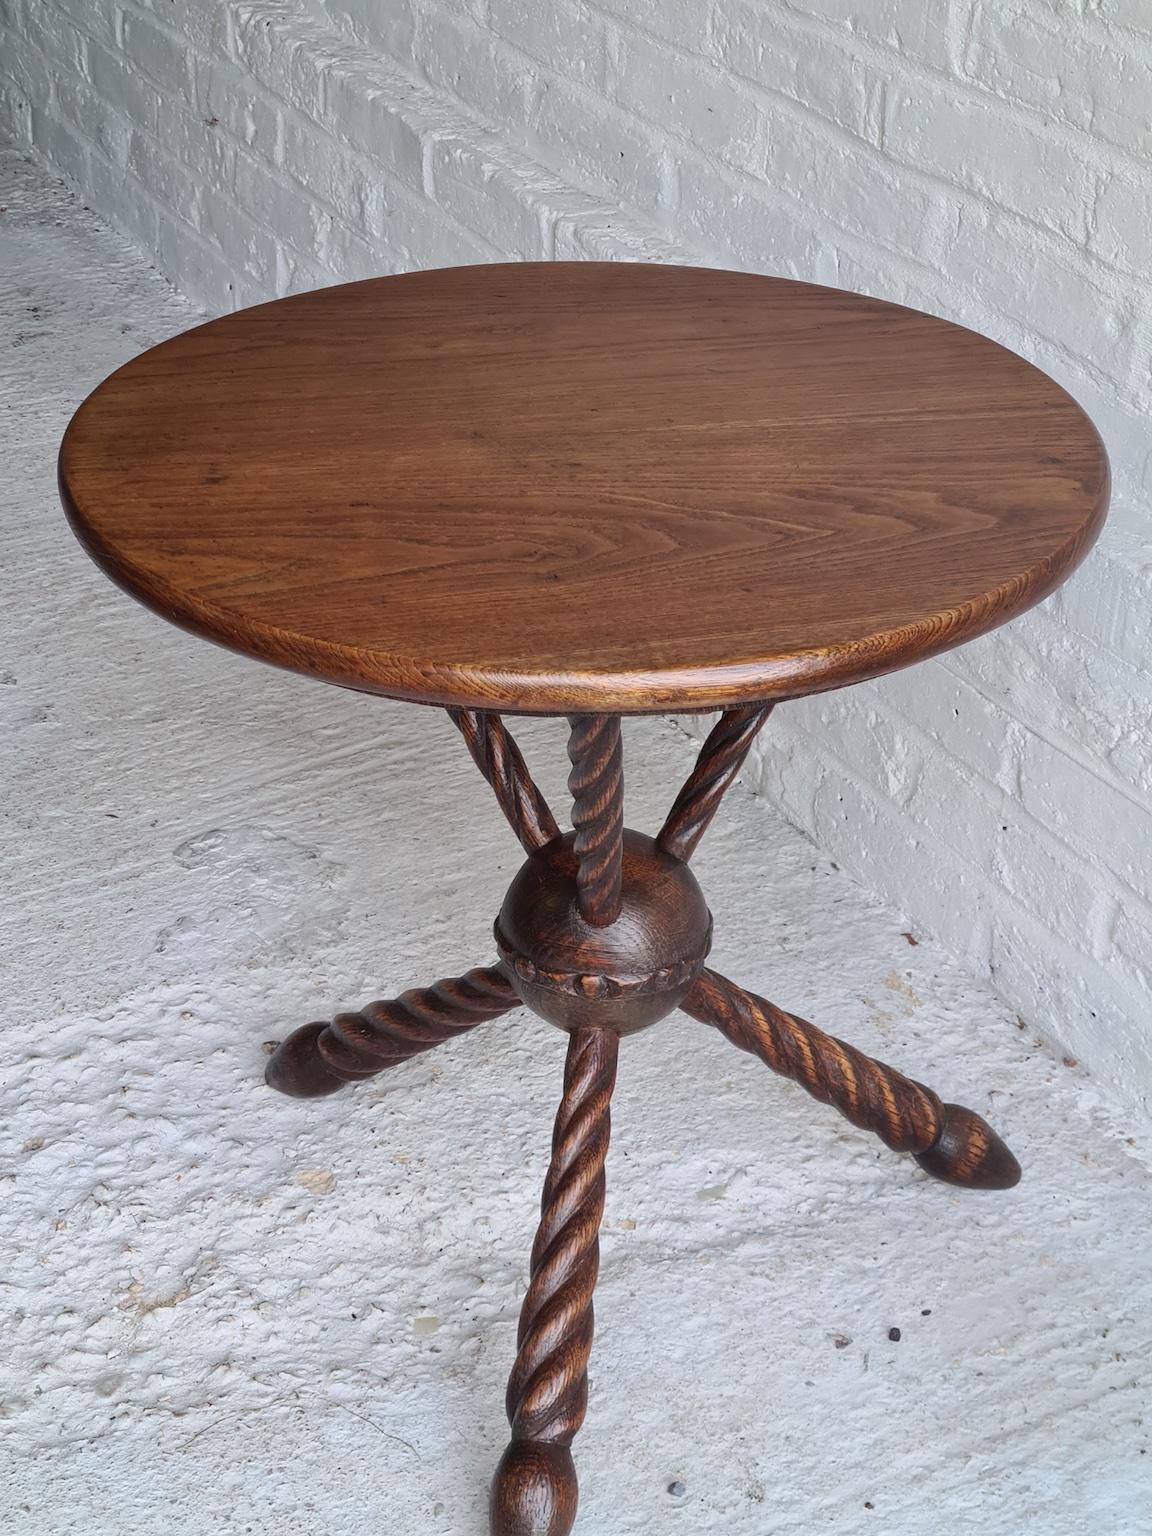 Mahogany 19th Century Gypsy Table, Occasional / Side Table, Tripod Legs, circa 1860-1870 For Sale